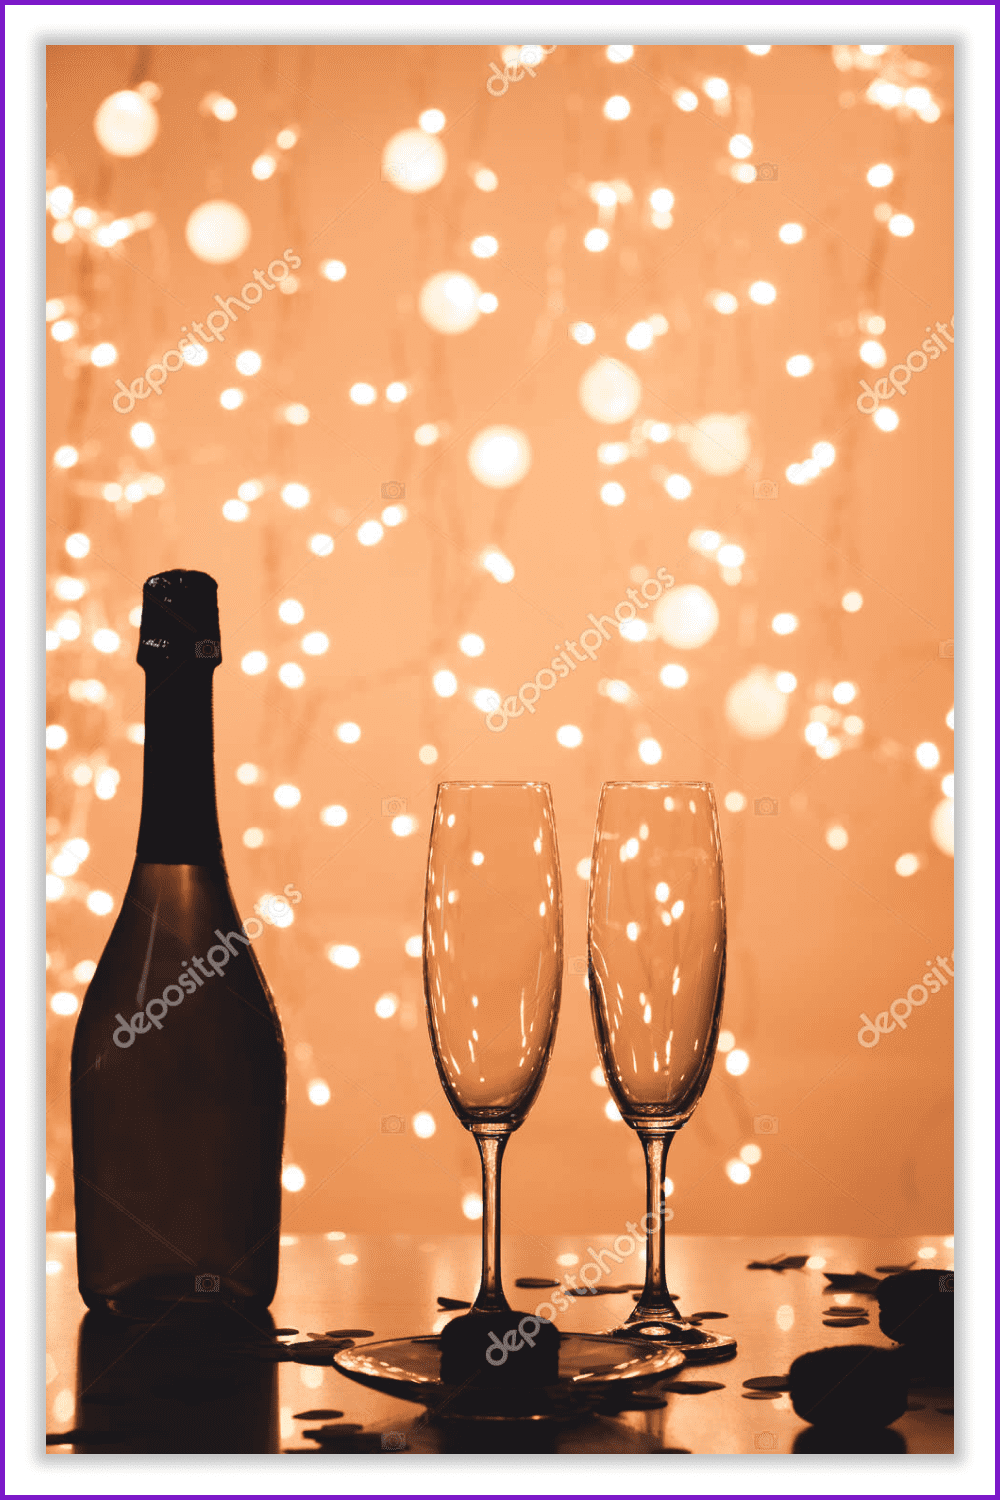 A bottle of champagne and two glasses against the background of yellow garlands.